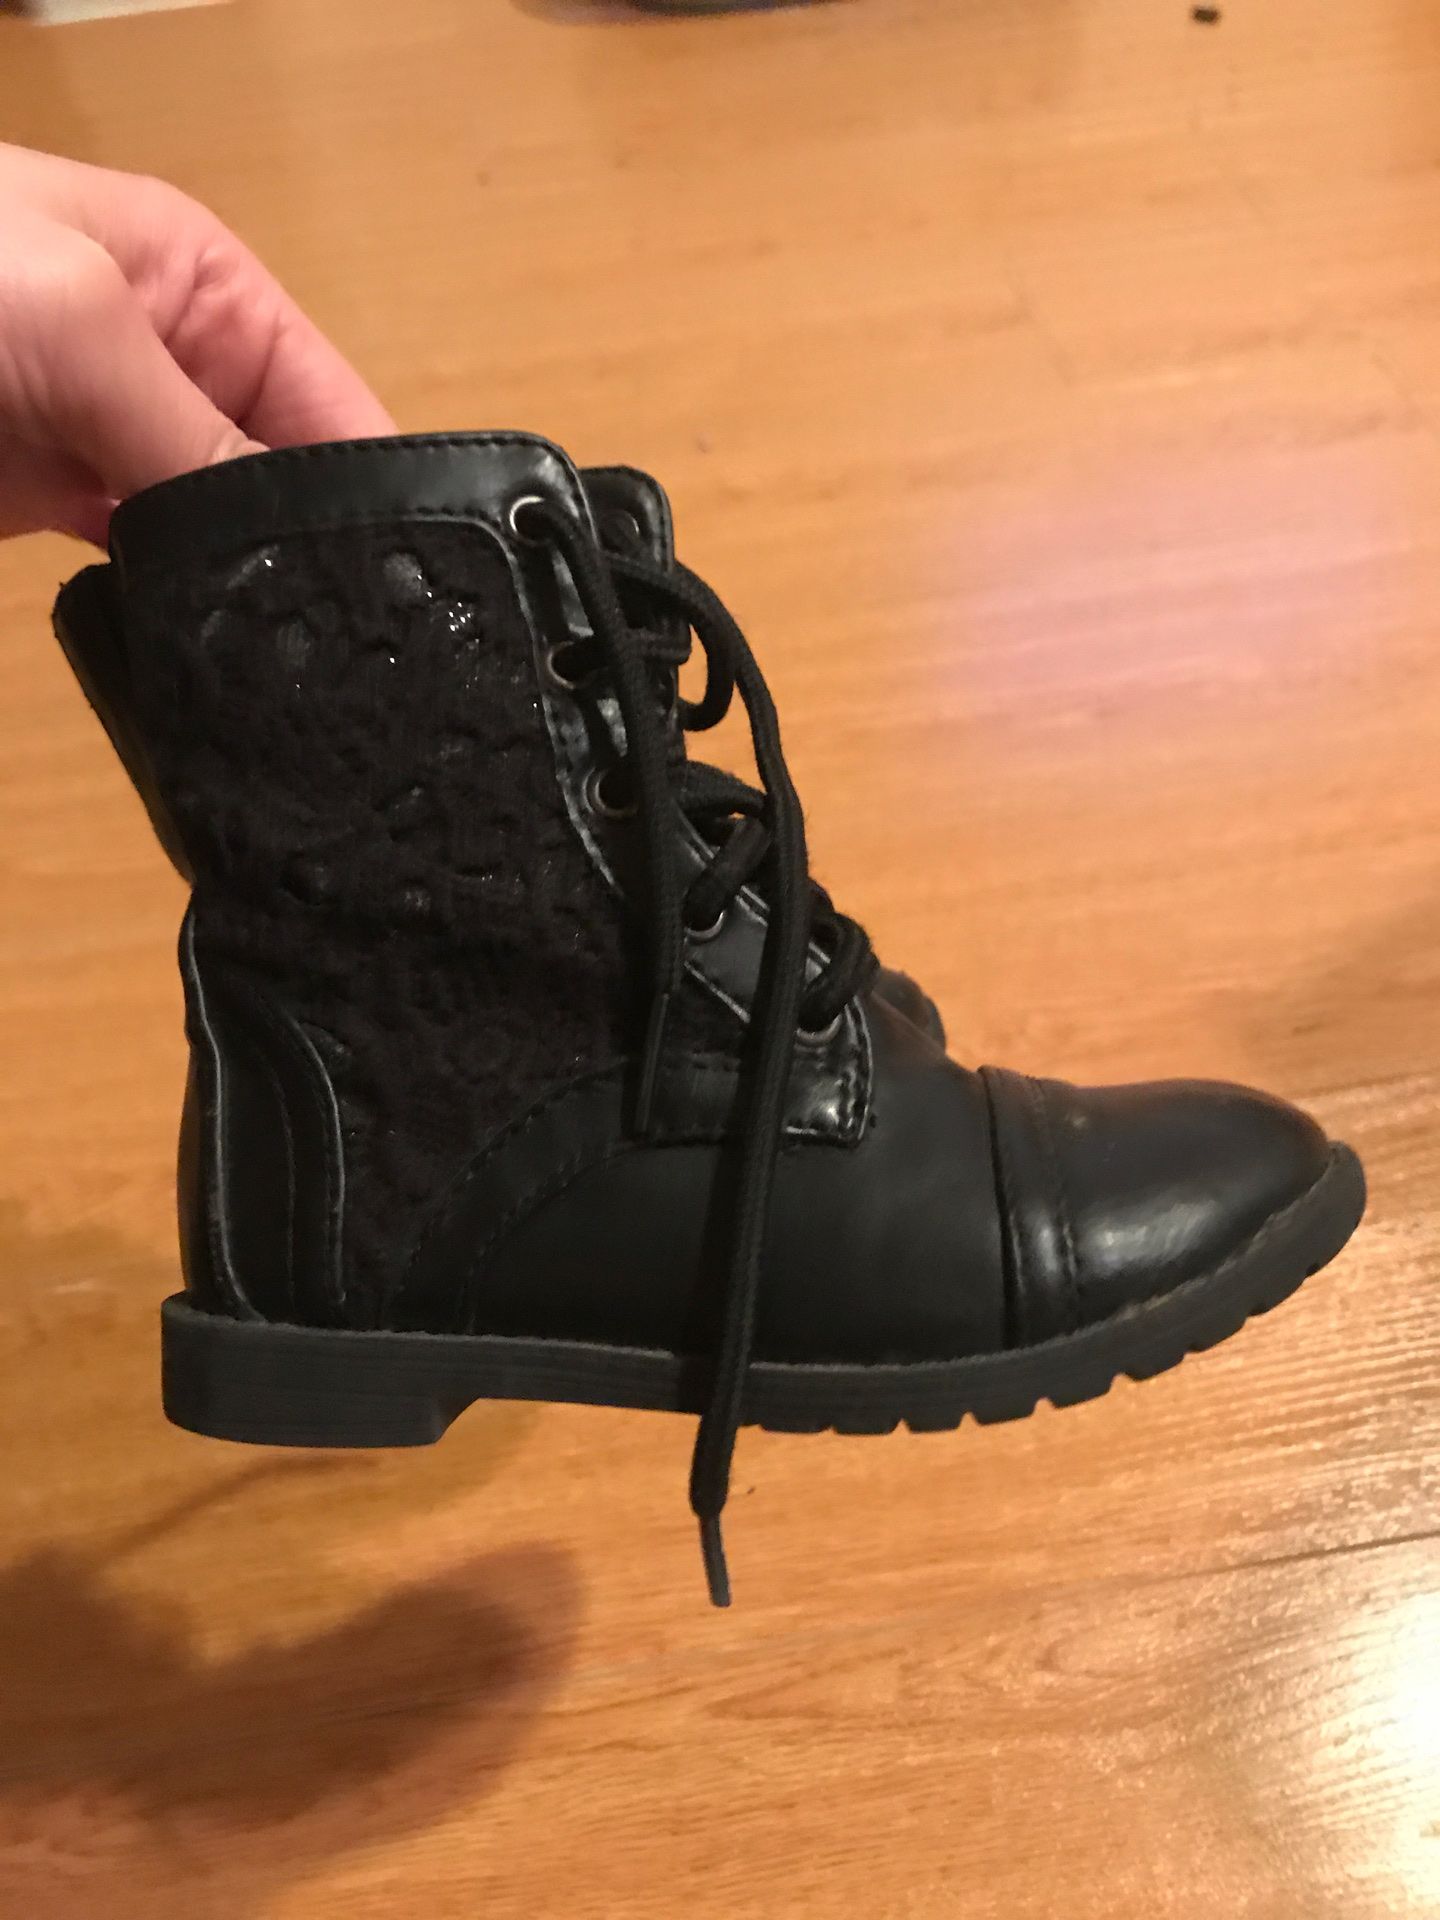 Girls size 7c boots